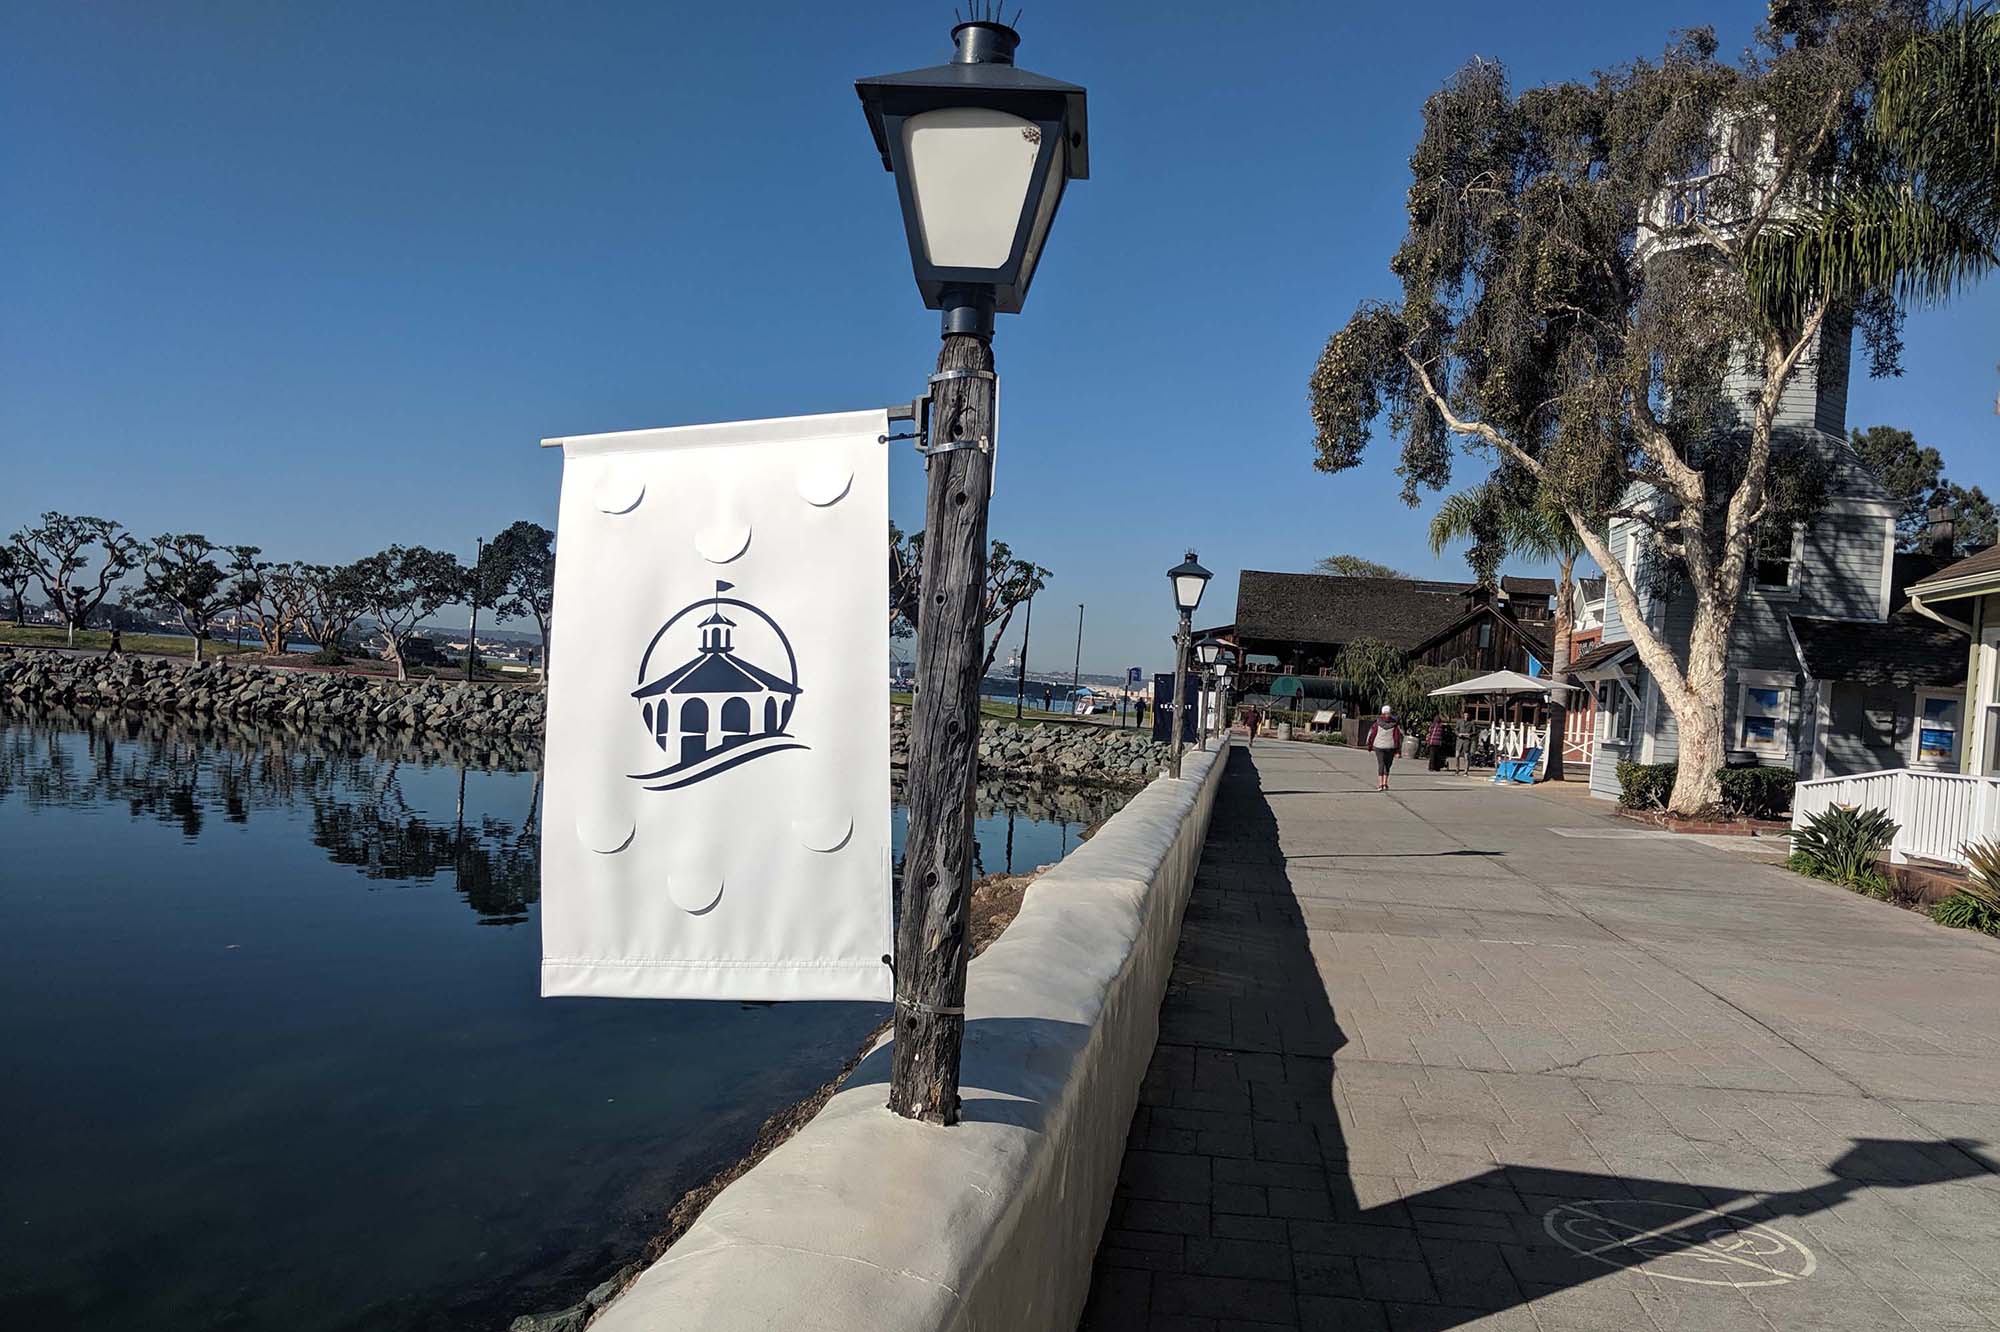 Seaport Village in Downtown San Diego - Tours and Activities